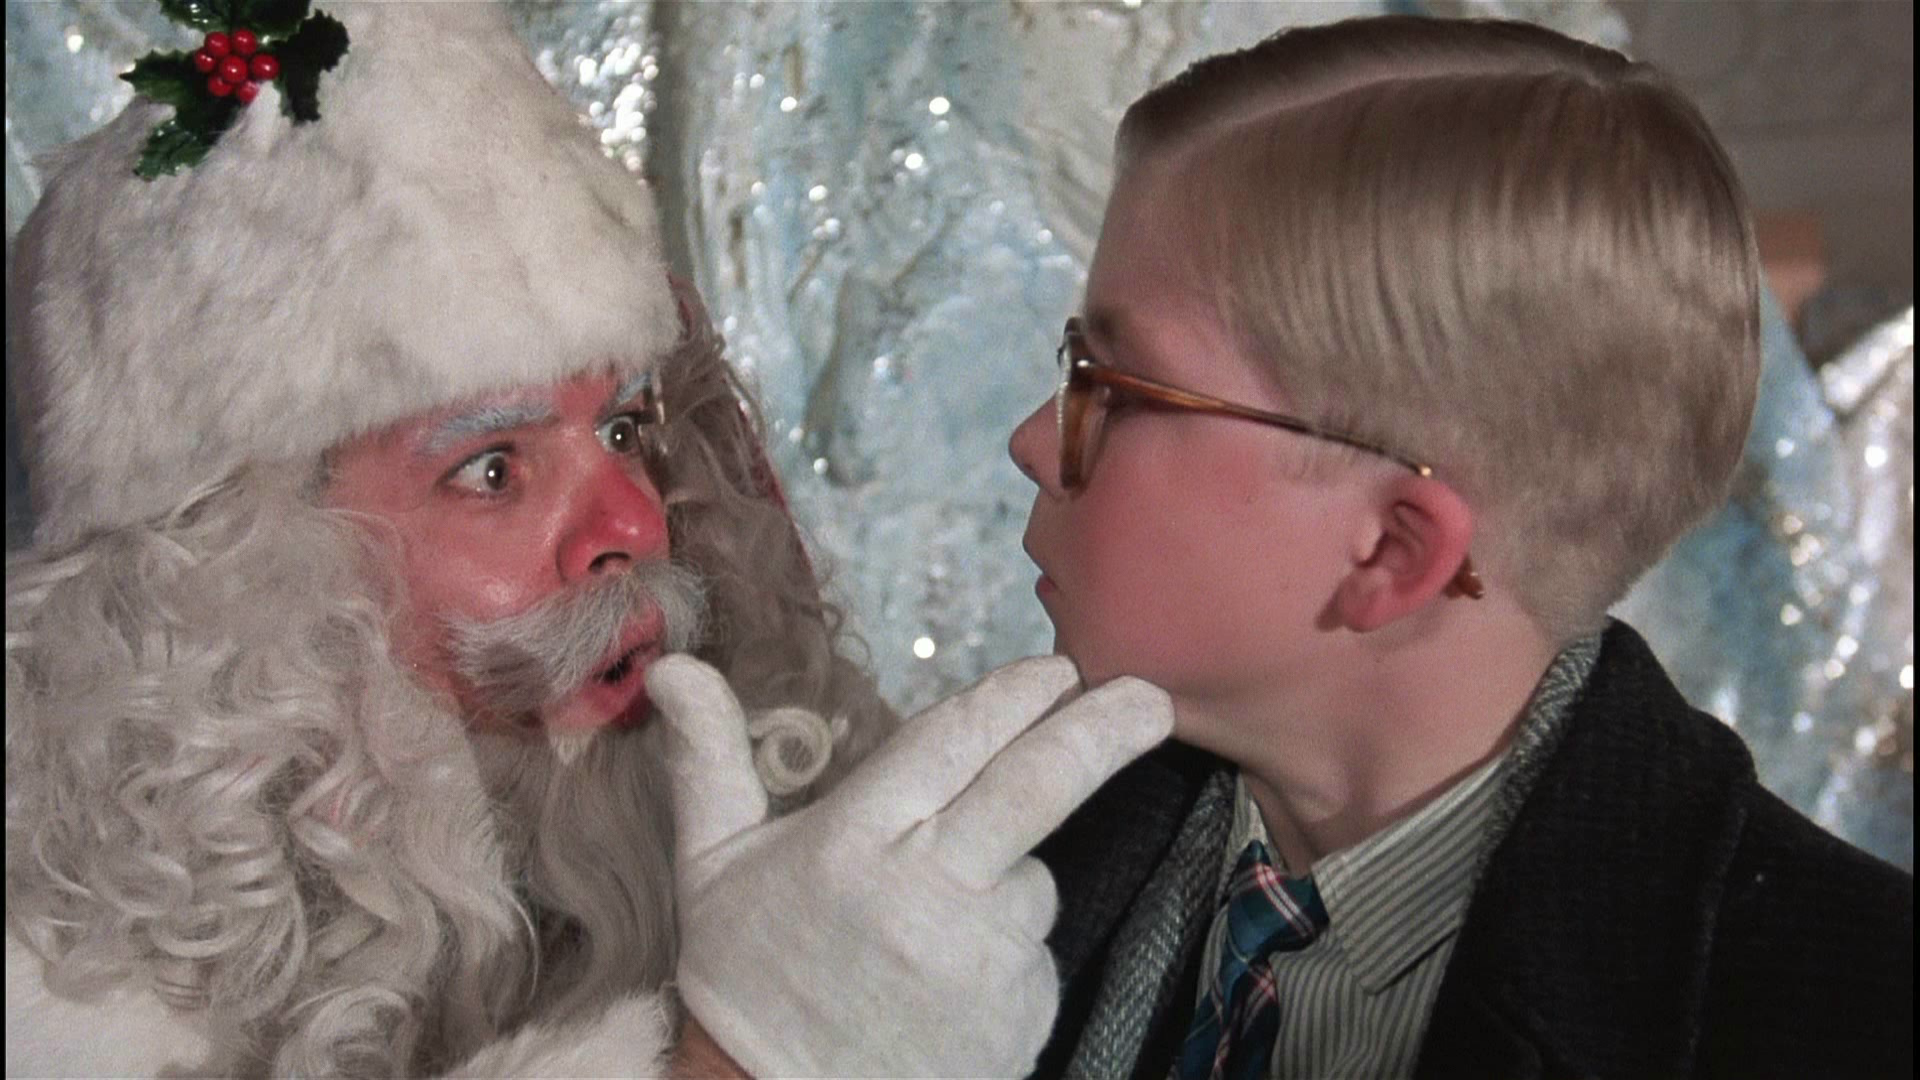 Jeff Gillen as Santa Claus in “A Christmas Story” | BEYOND THE MARQUEE